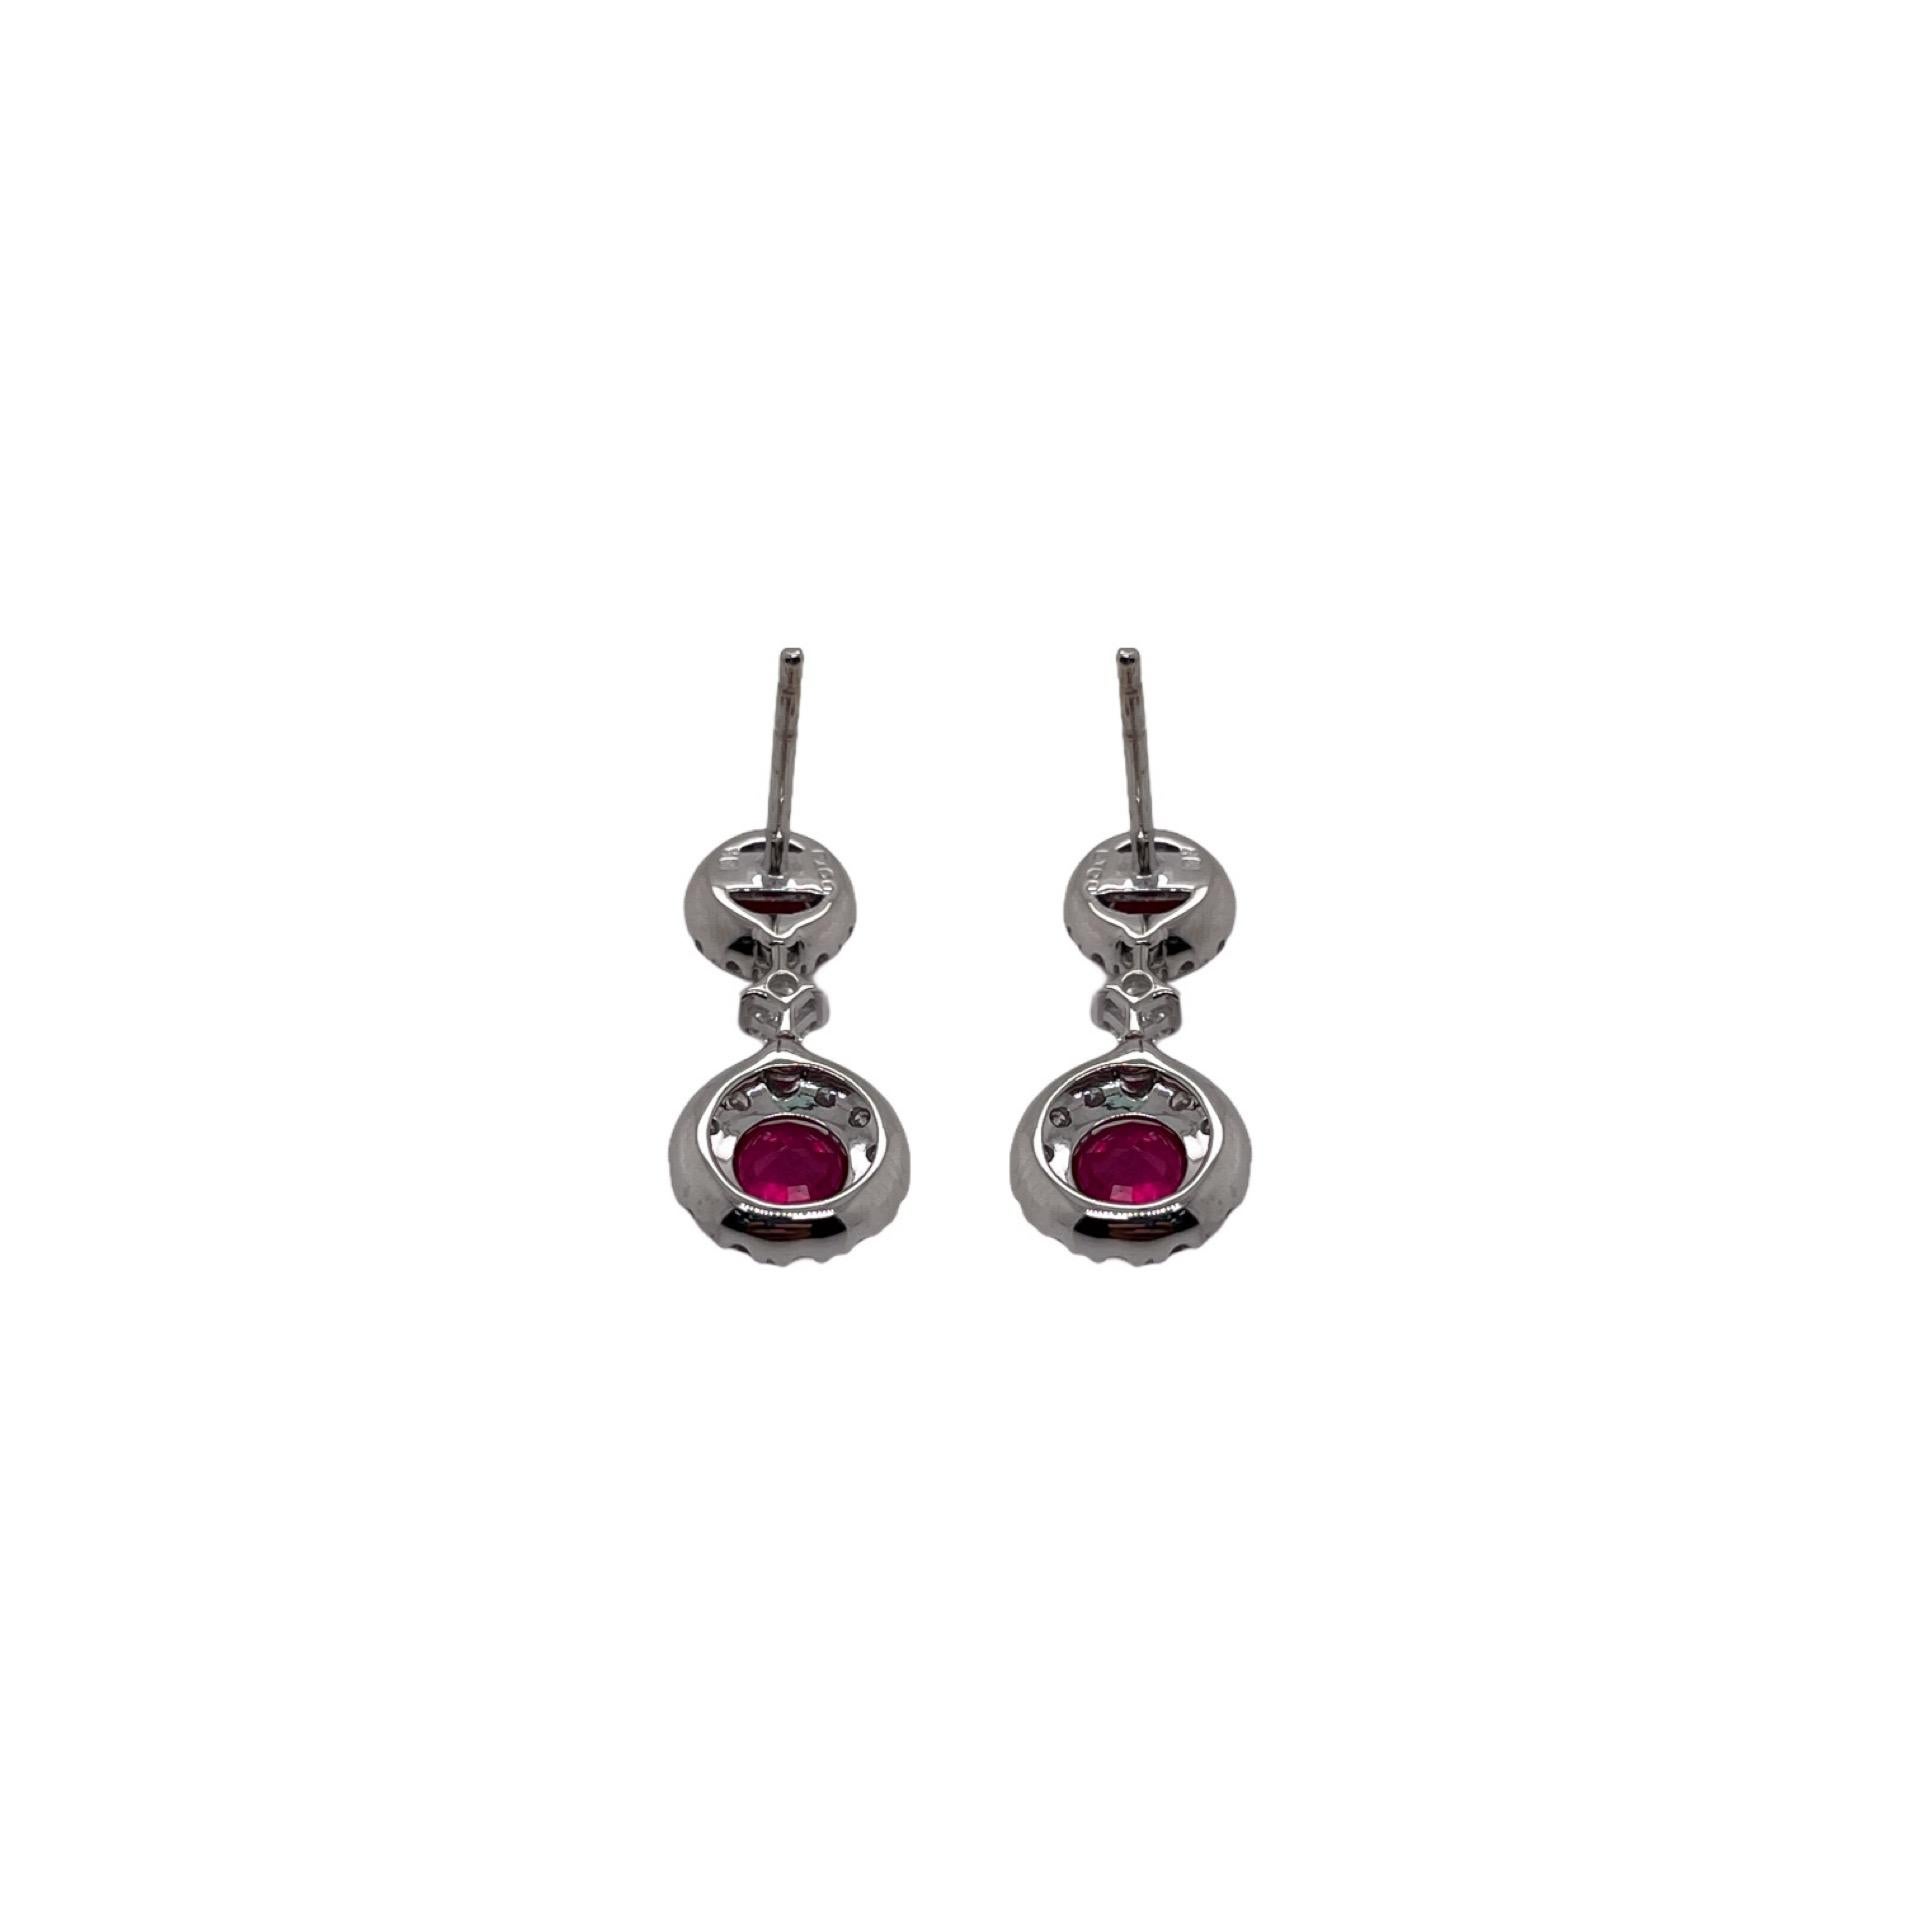 Round Cut Round Ruby & Diamond Drop Earrings in 18K White Gold